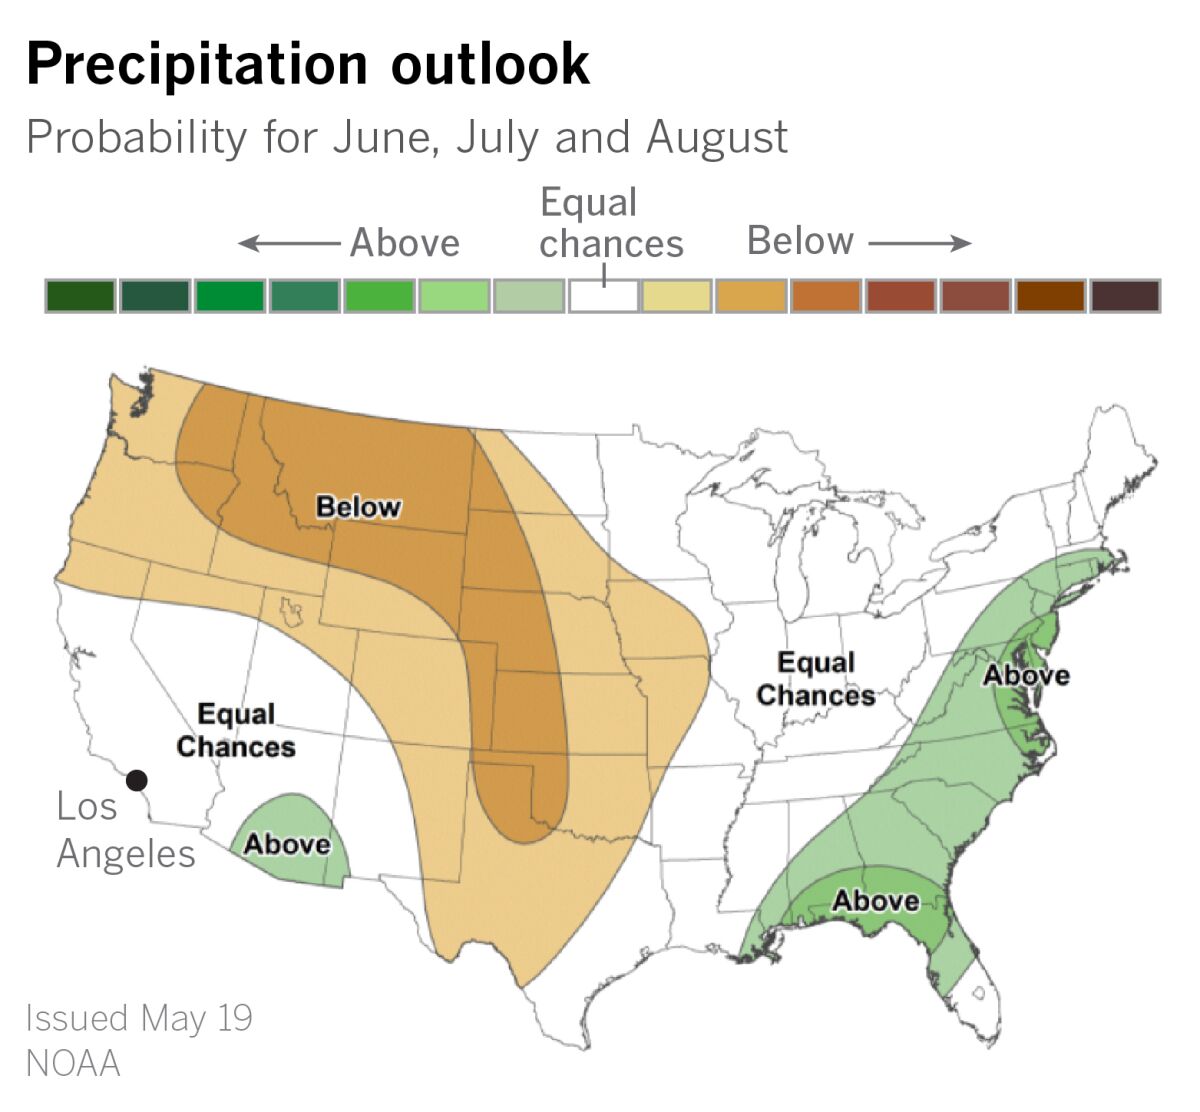 Precipitation outlook for June, July and August.